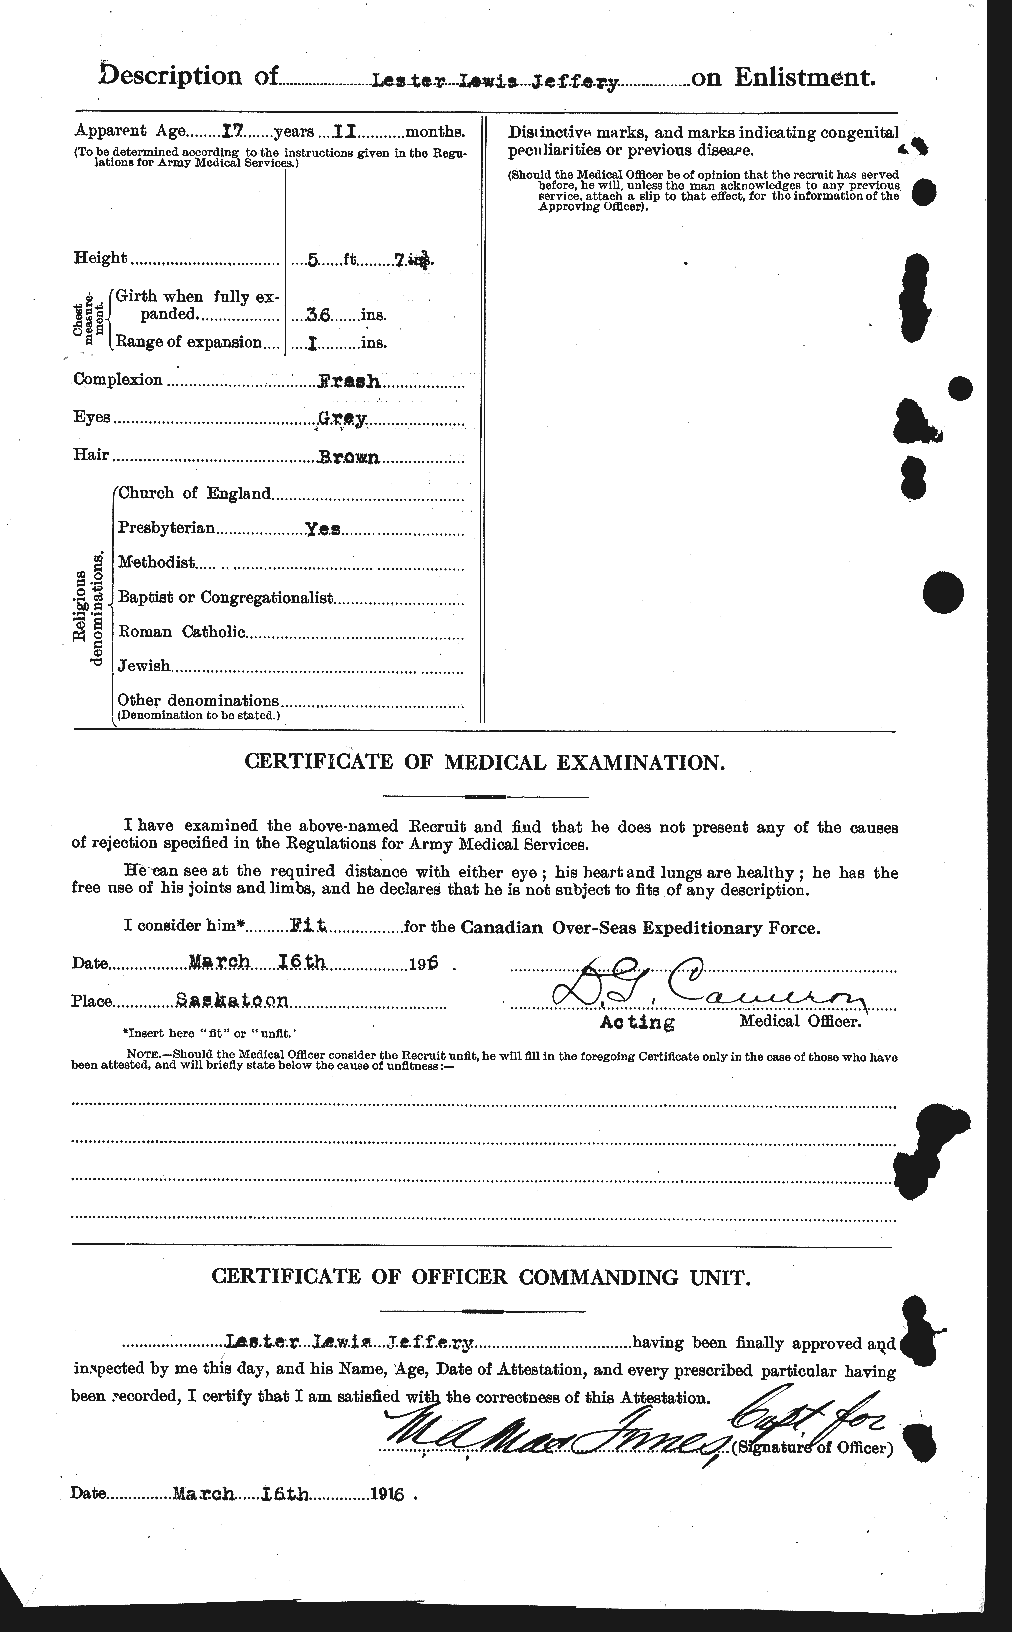 Personnel Records of the First World War - CEF 417786b